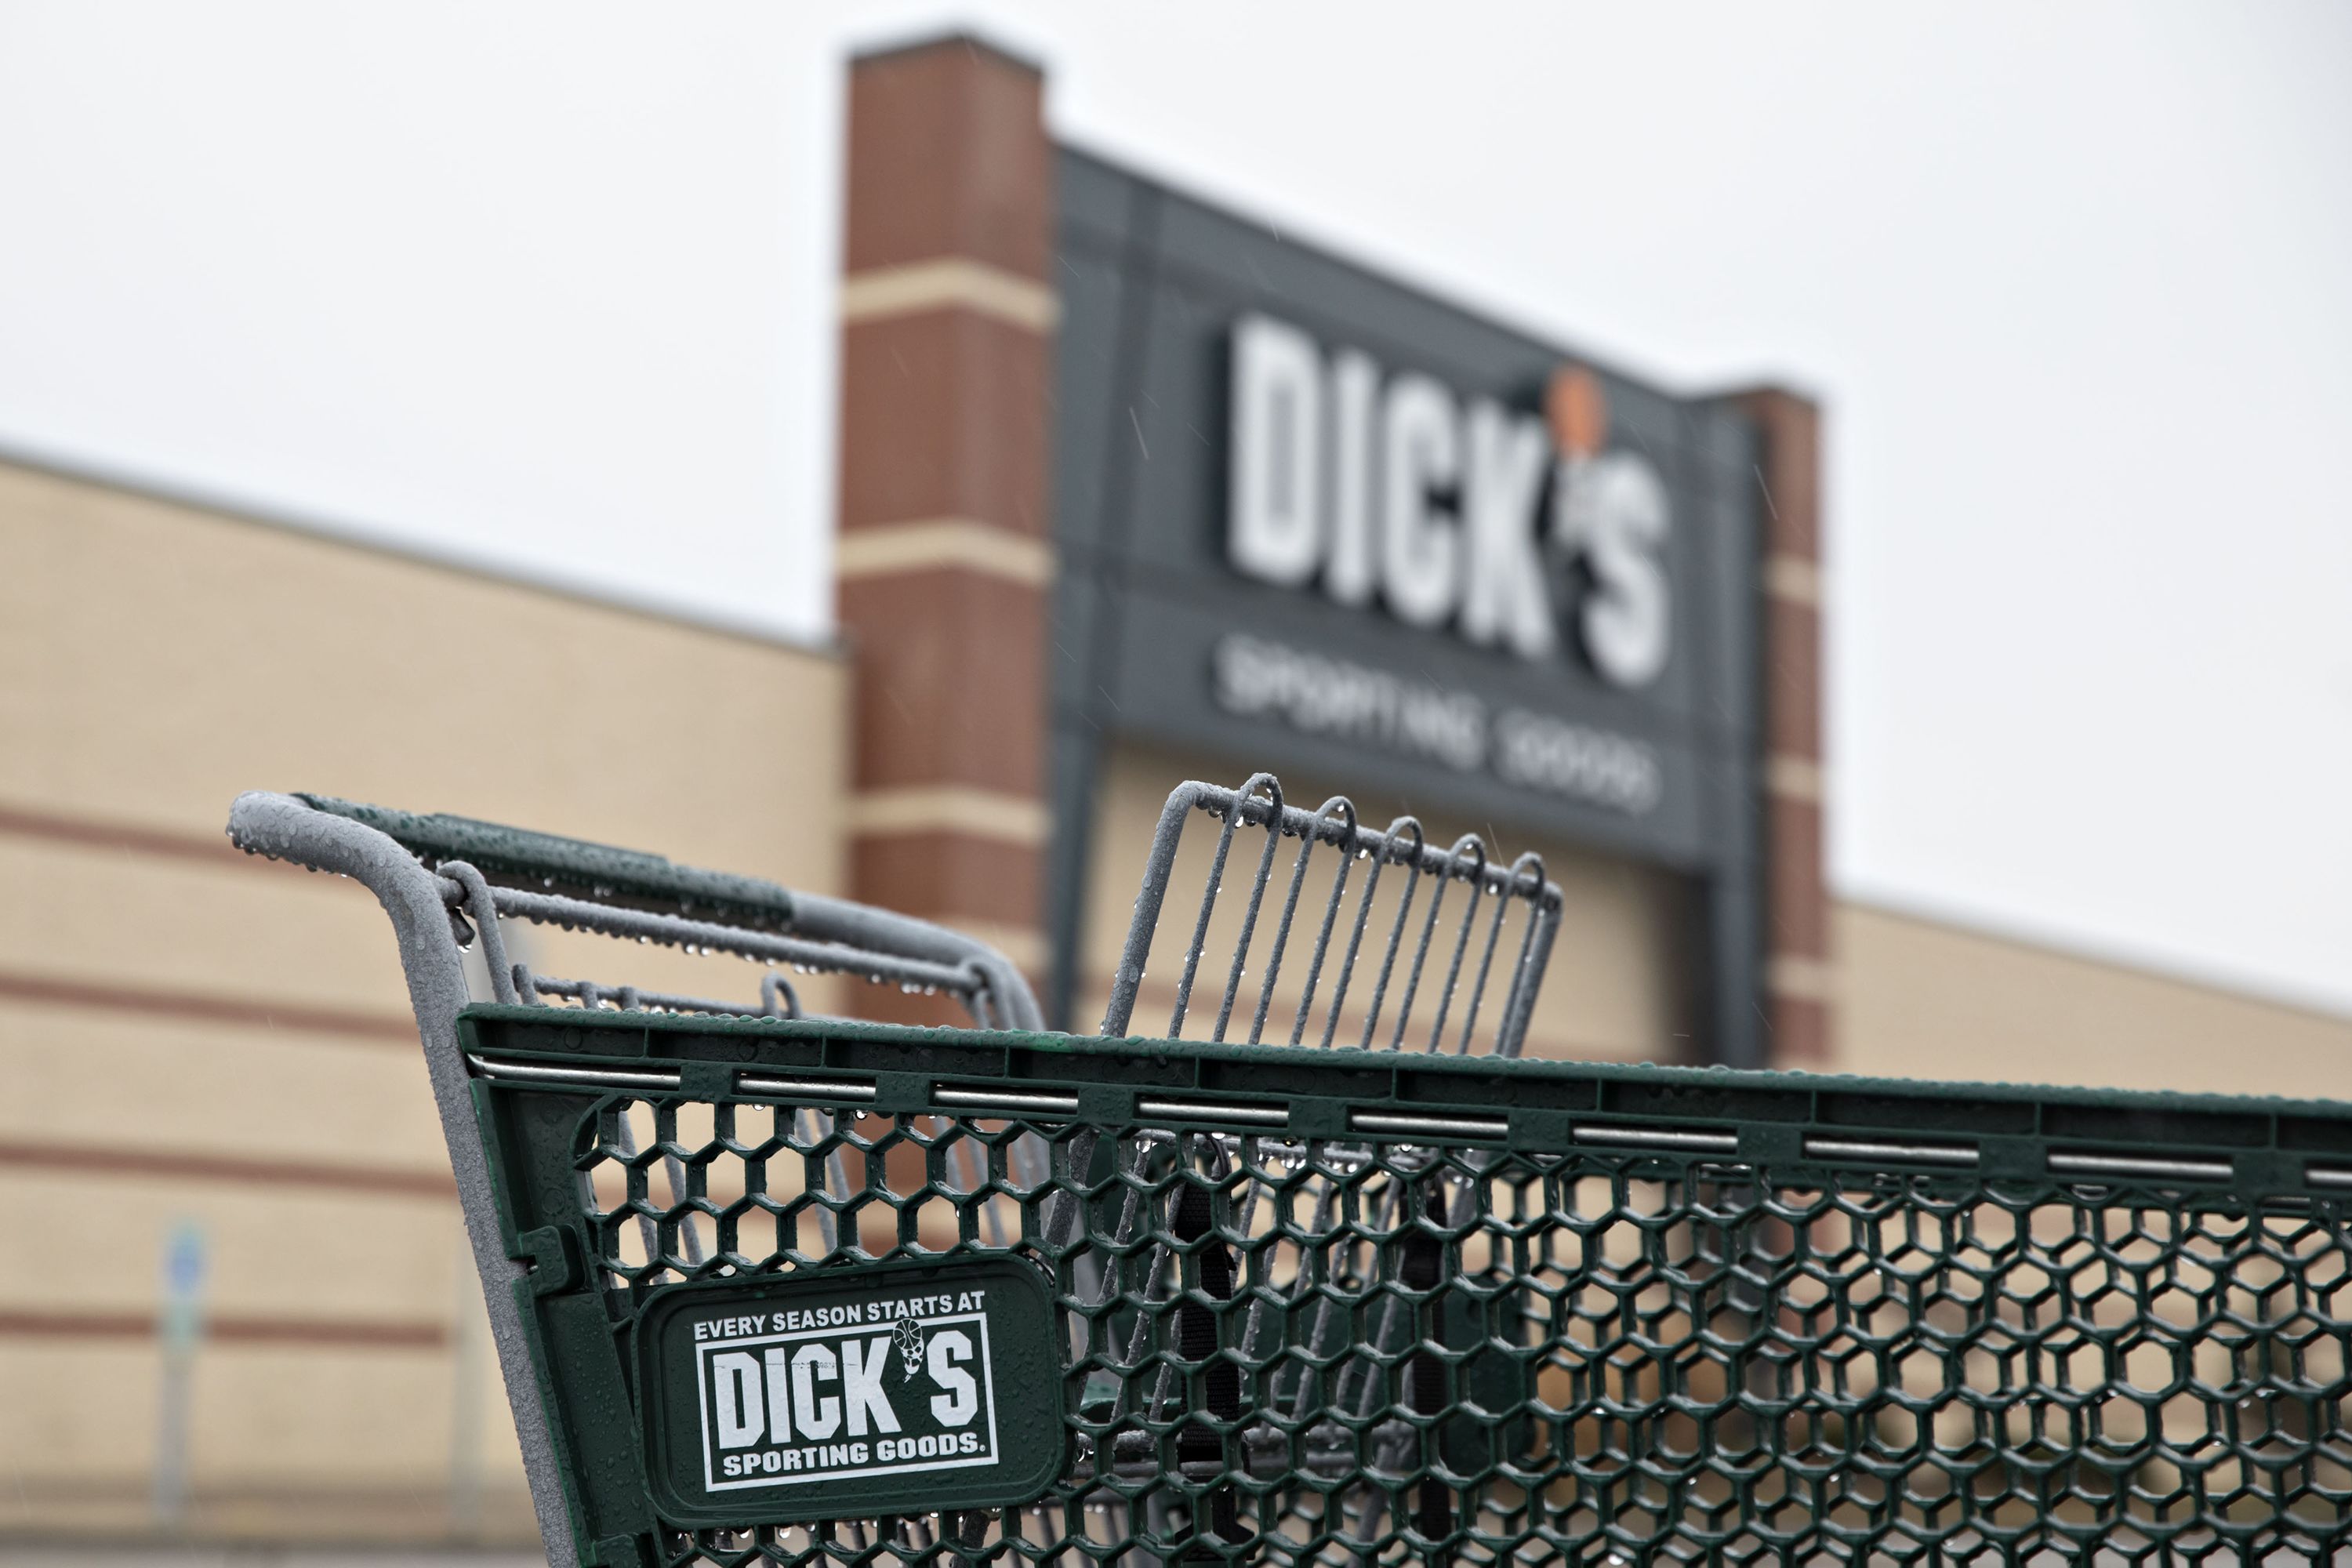 DICK'S Sporting Goods Store in Fairless Hills, PA